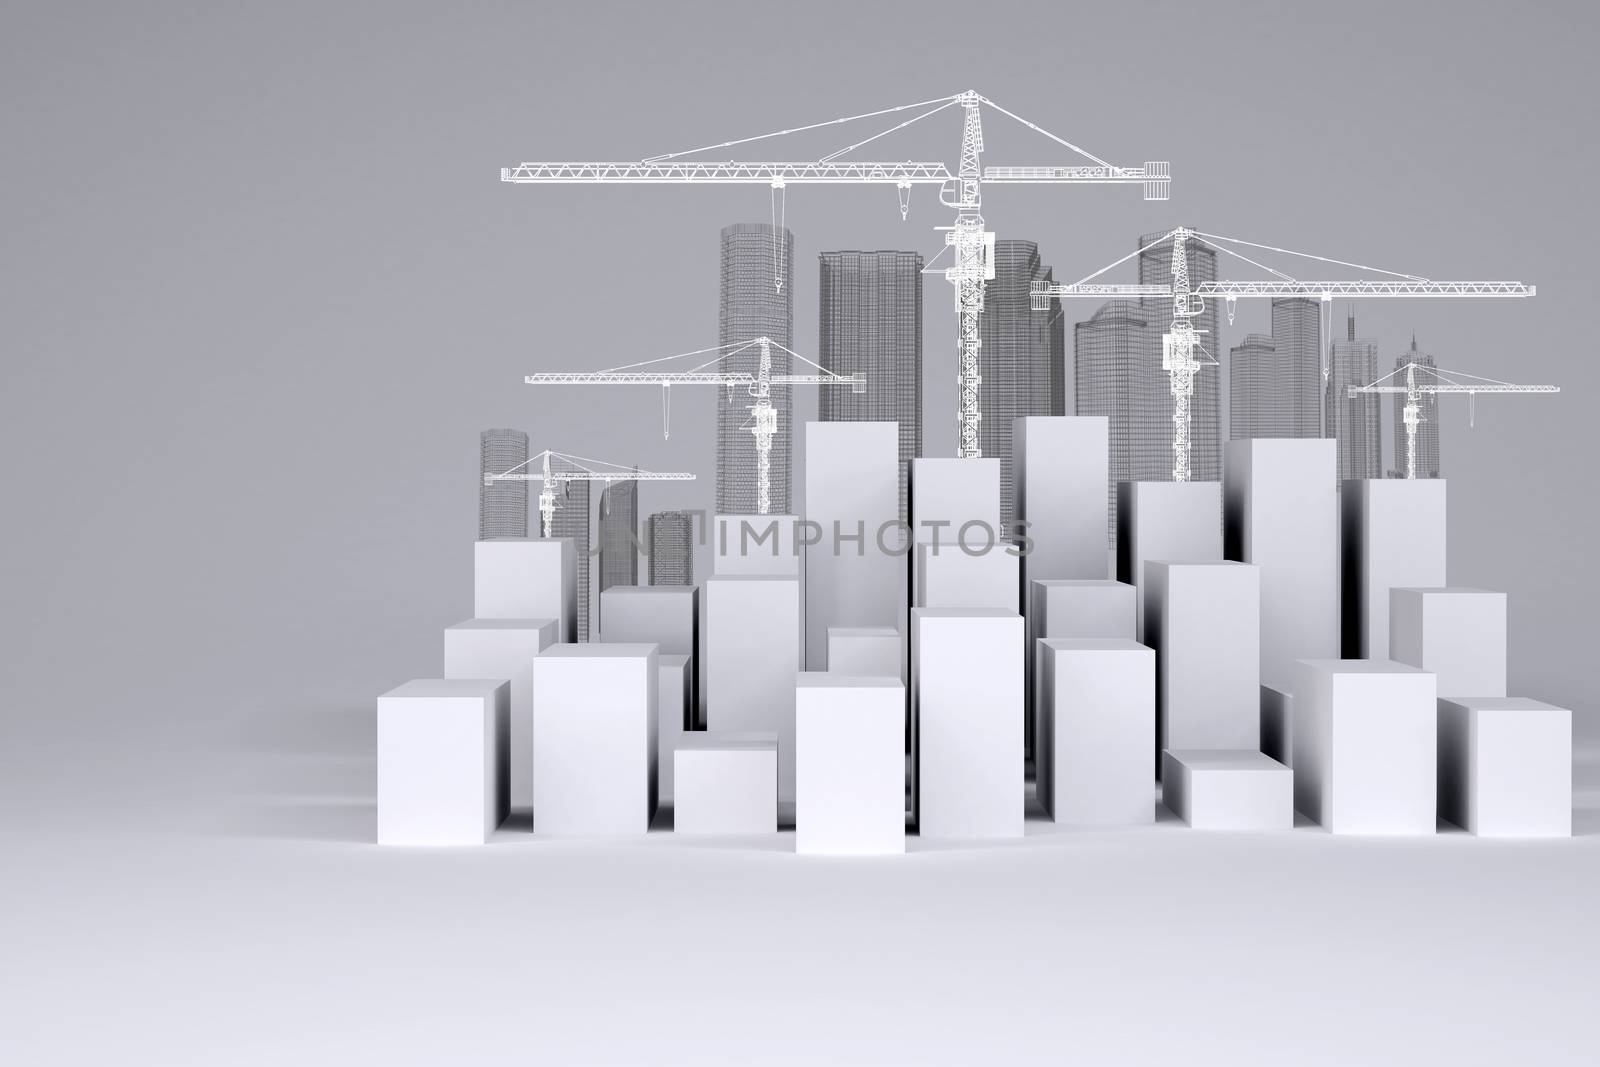 White cubes with wire-frame buildings and tower cranes on gray background. Concept of urban construction